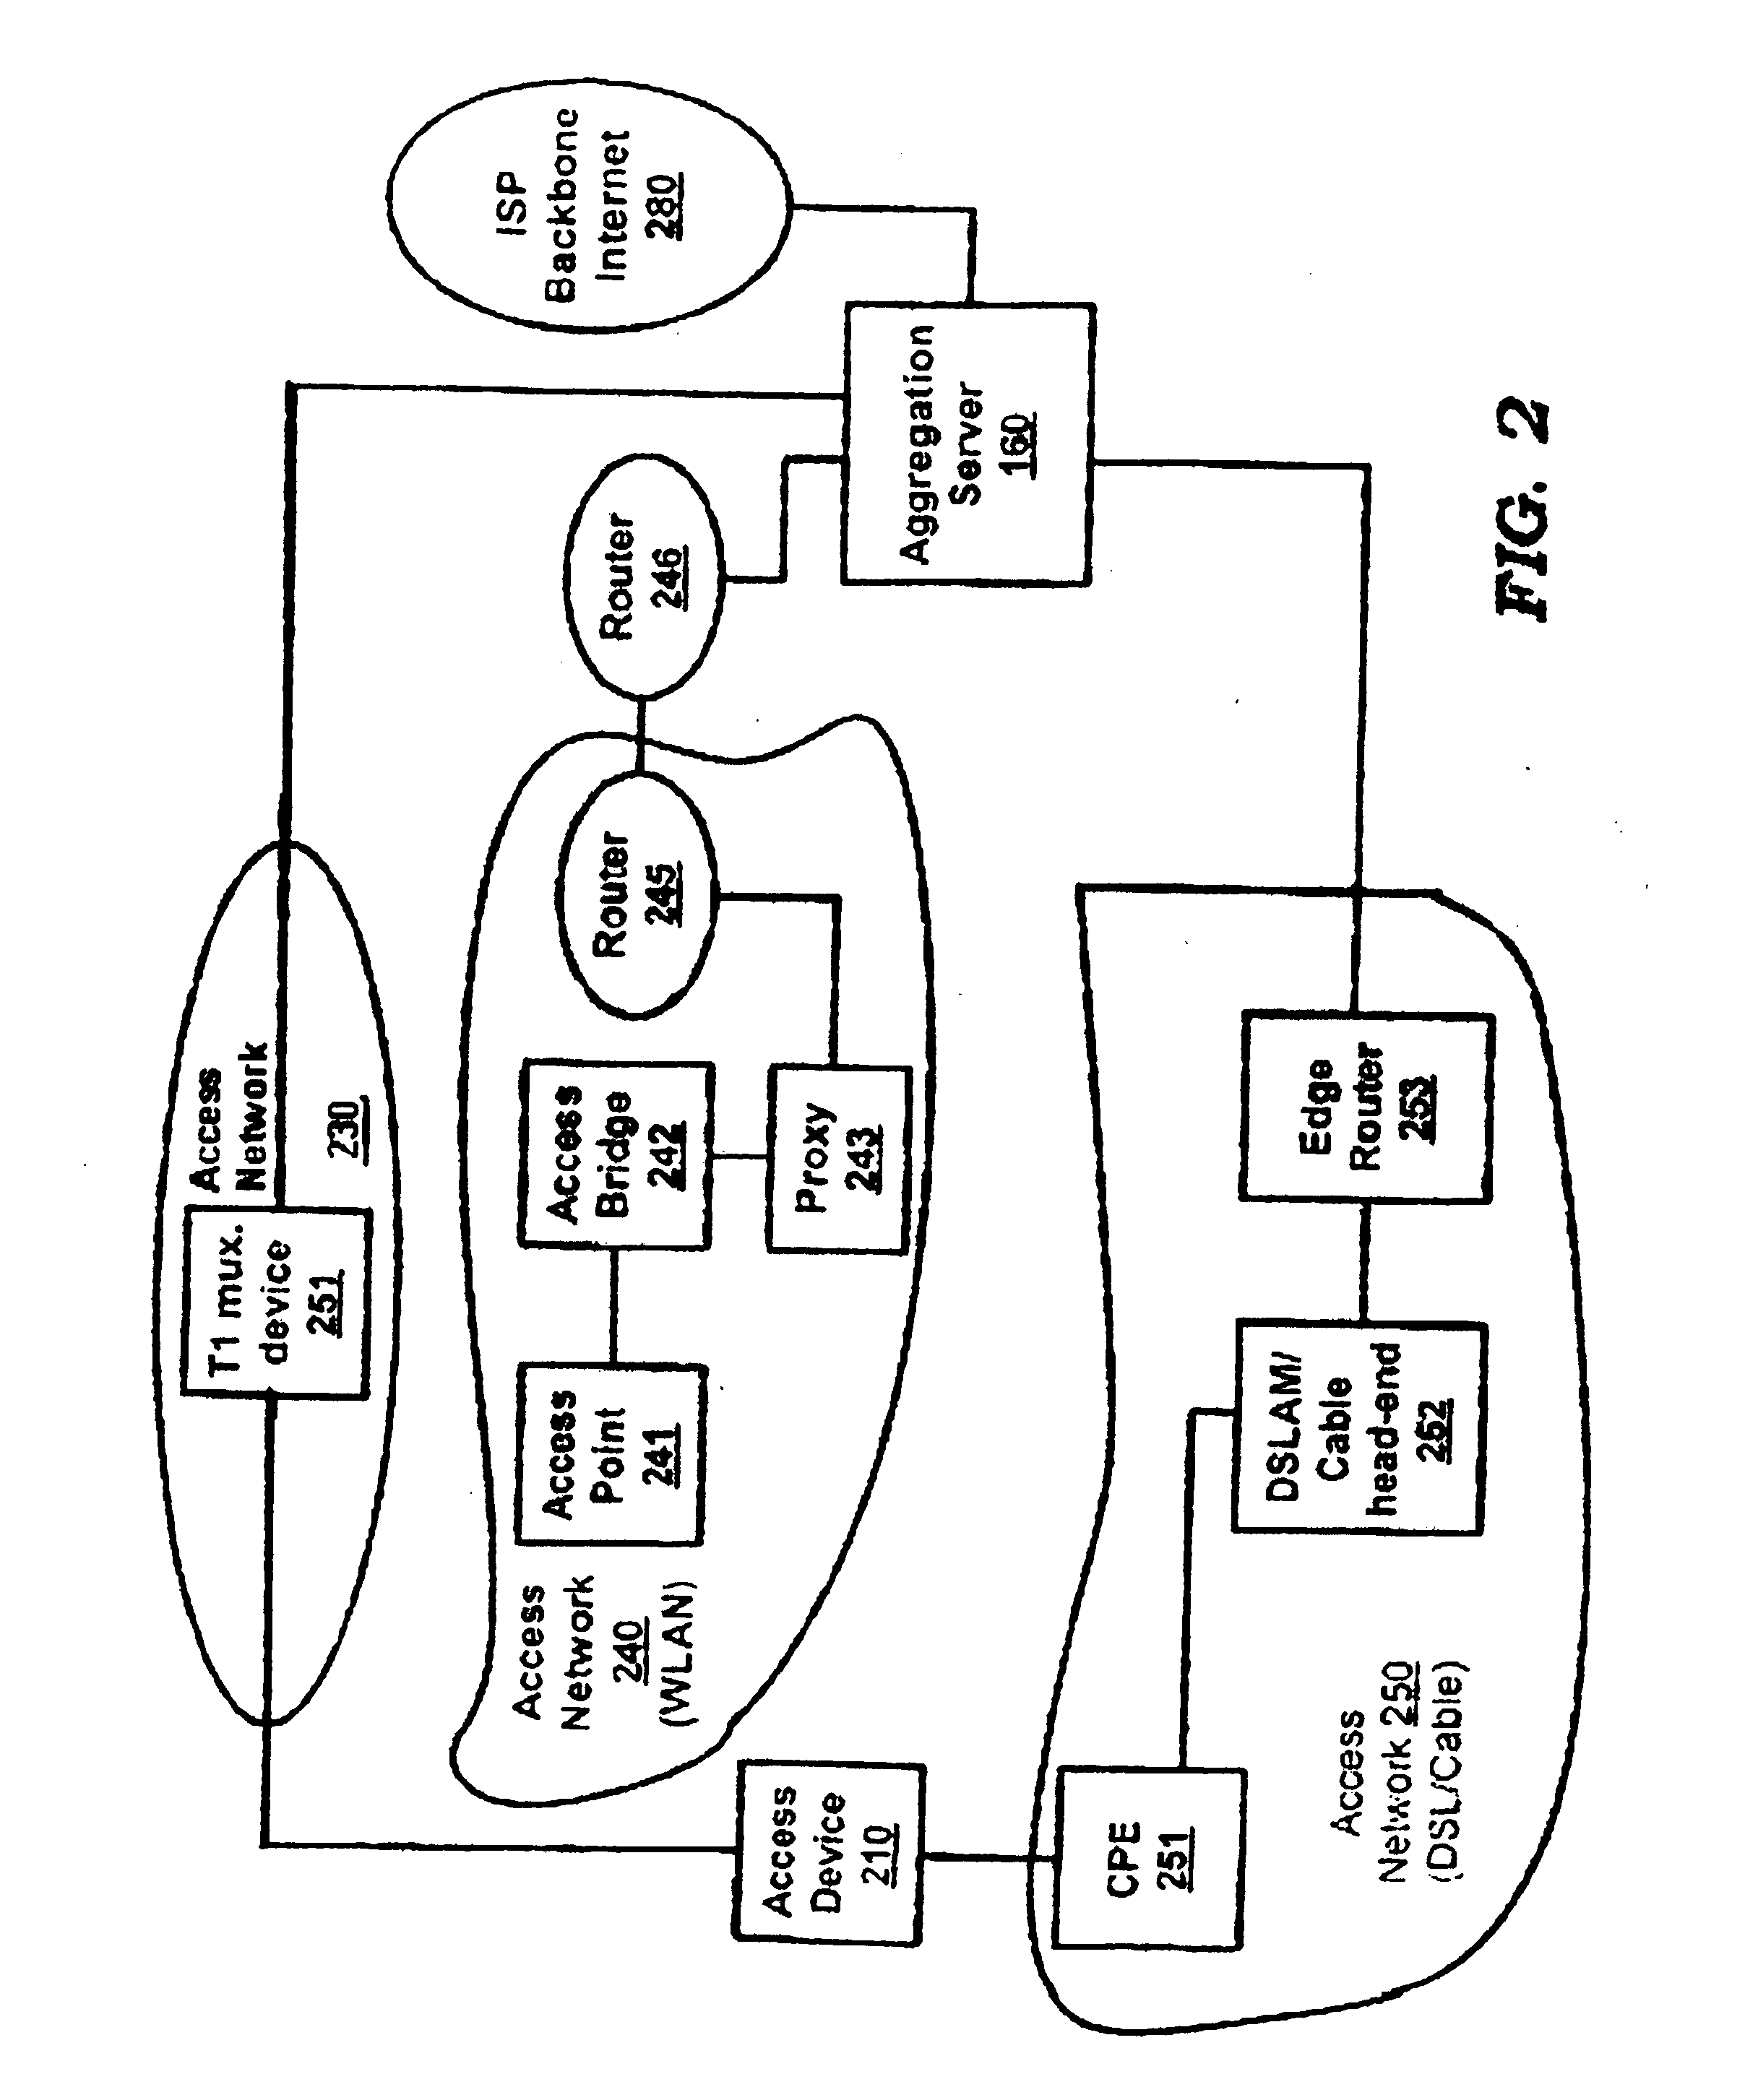 Multi-link PPP over heterogeneous single path access networks